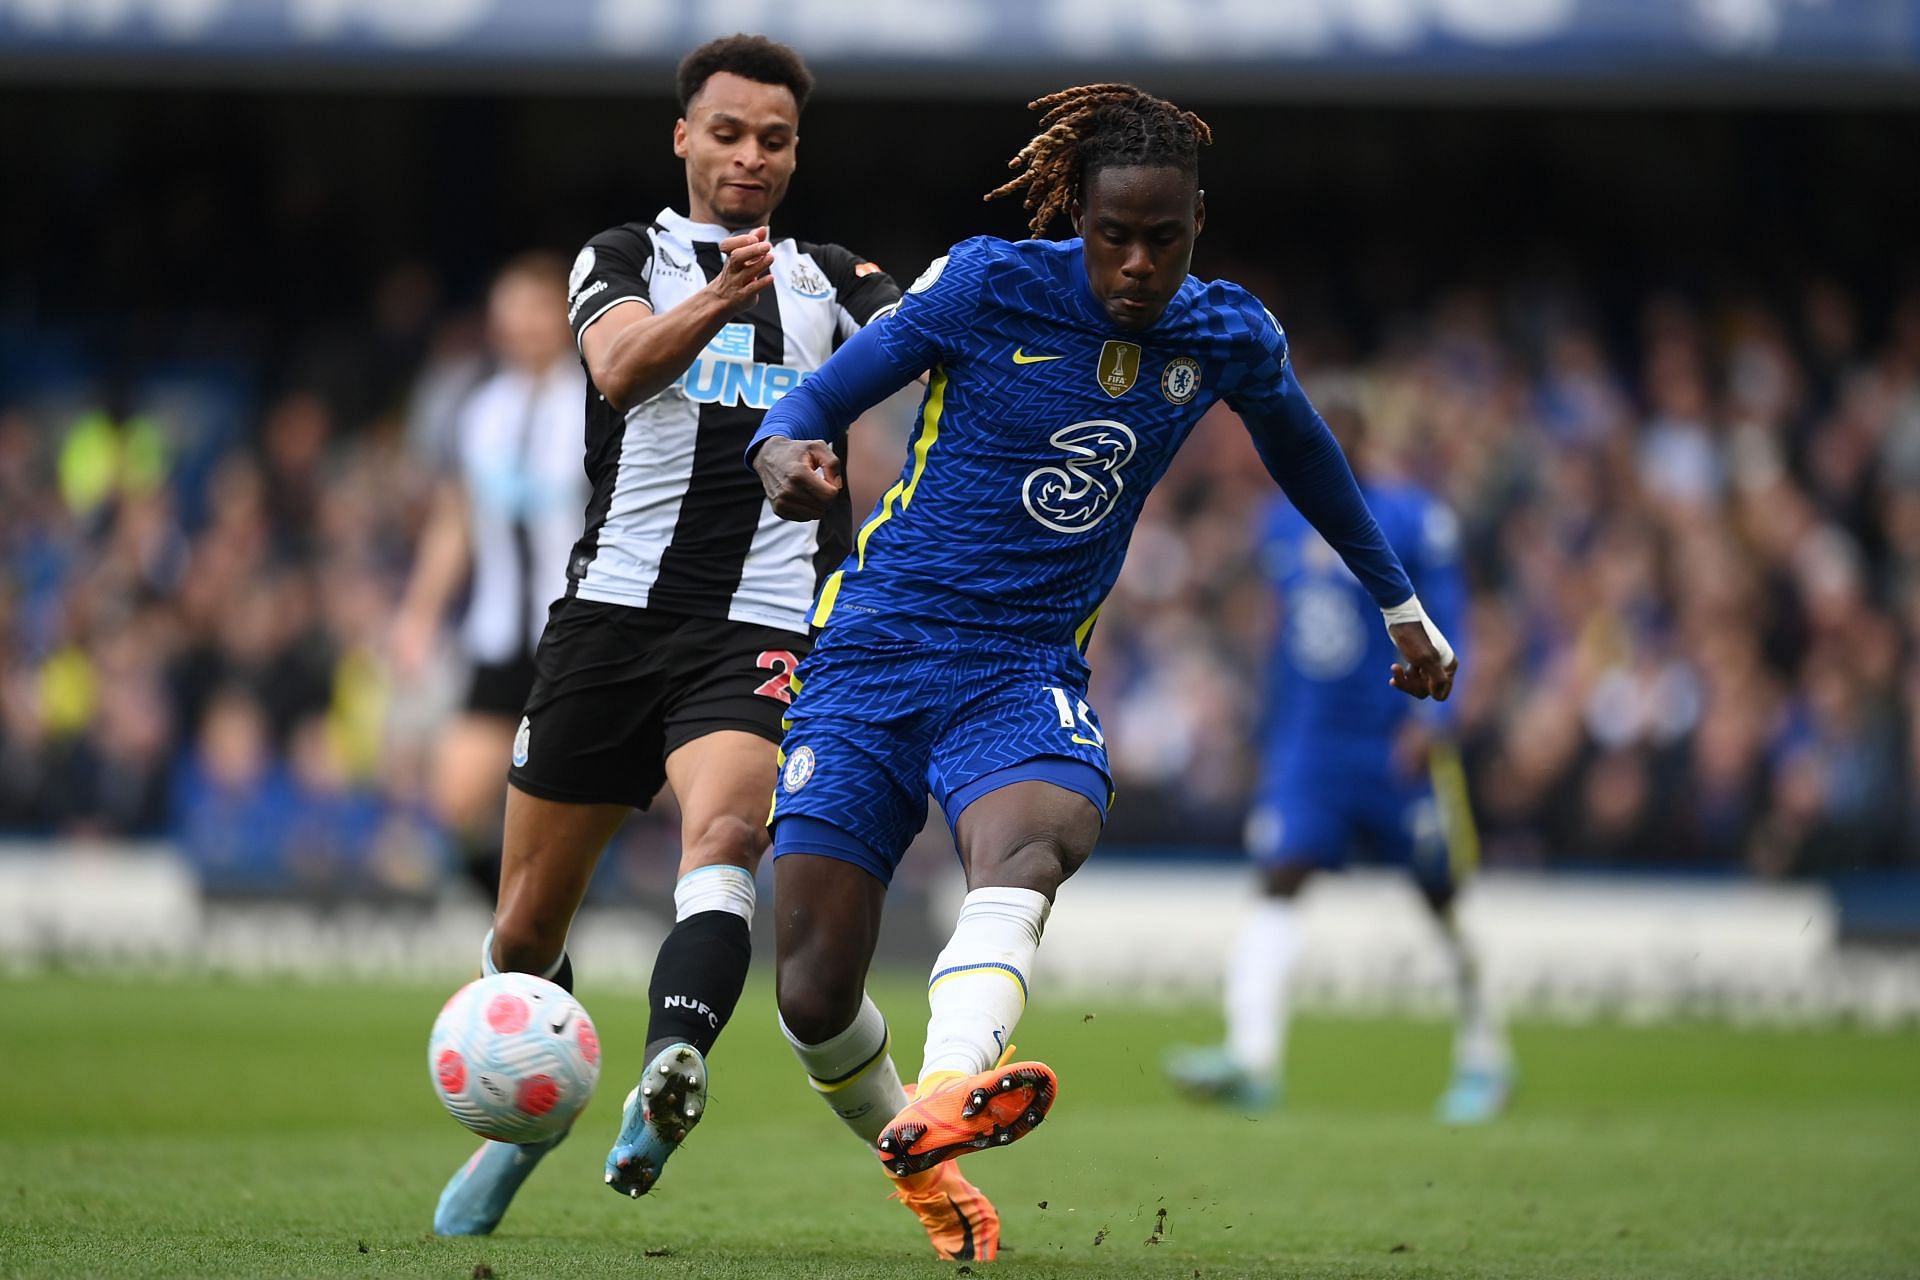 Trevoh Chalobah has developed into a proper player at Chelsea.